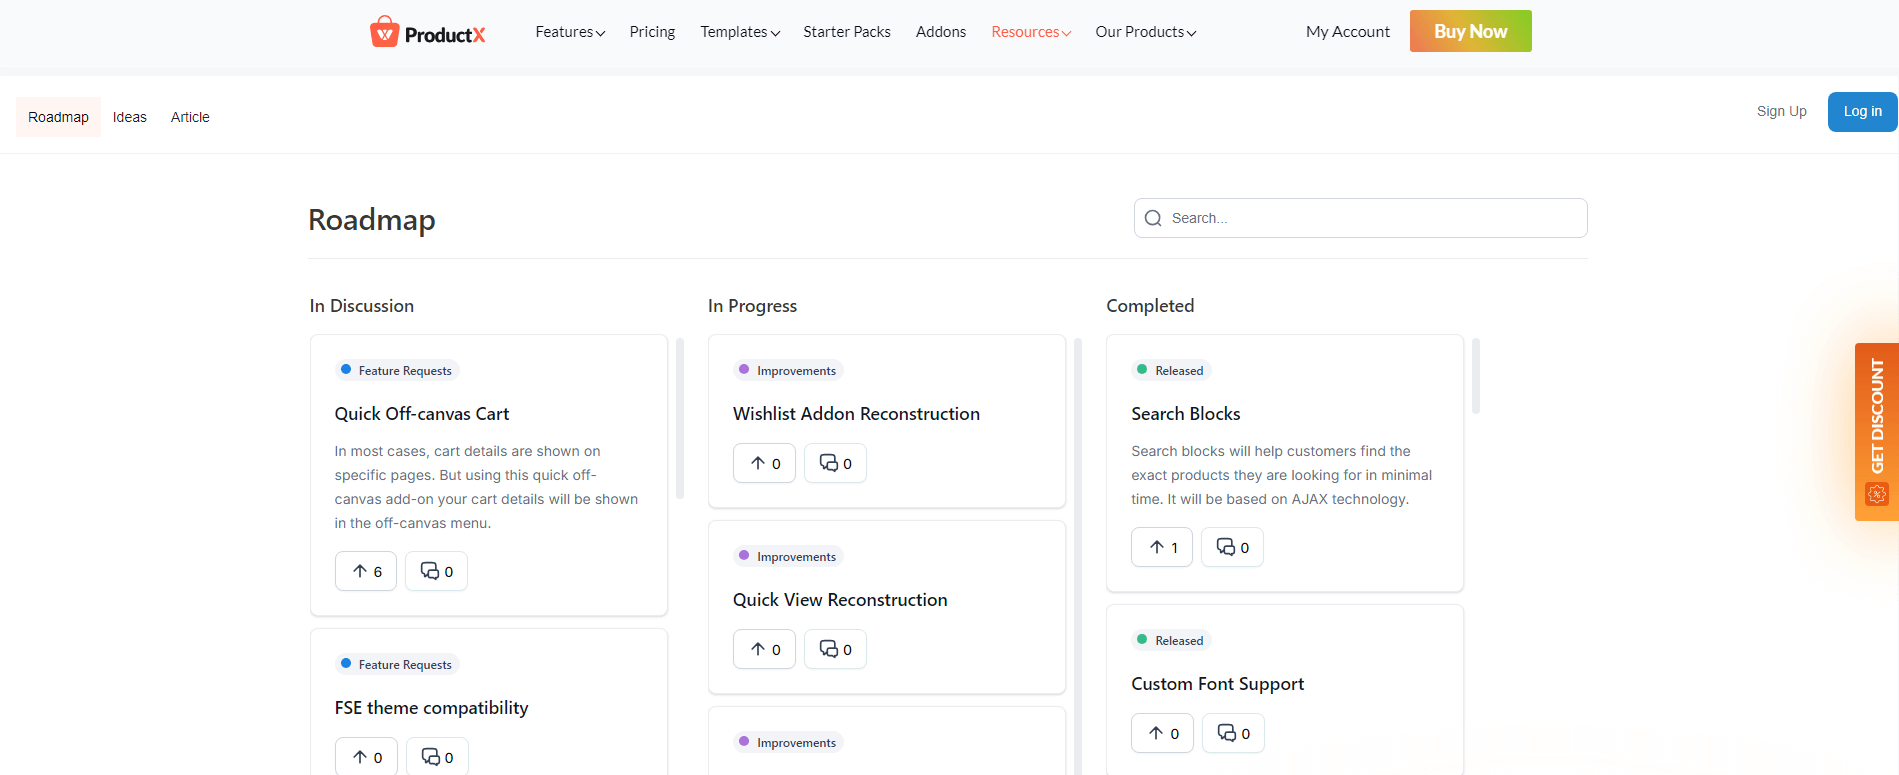 ProductX's Latest Features